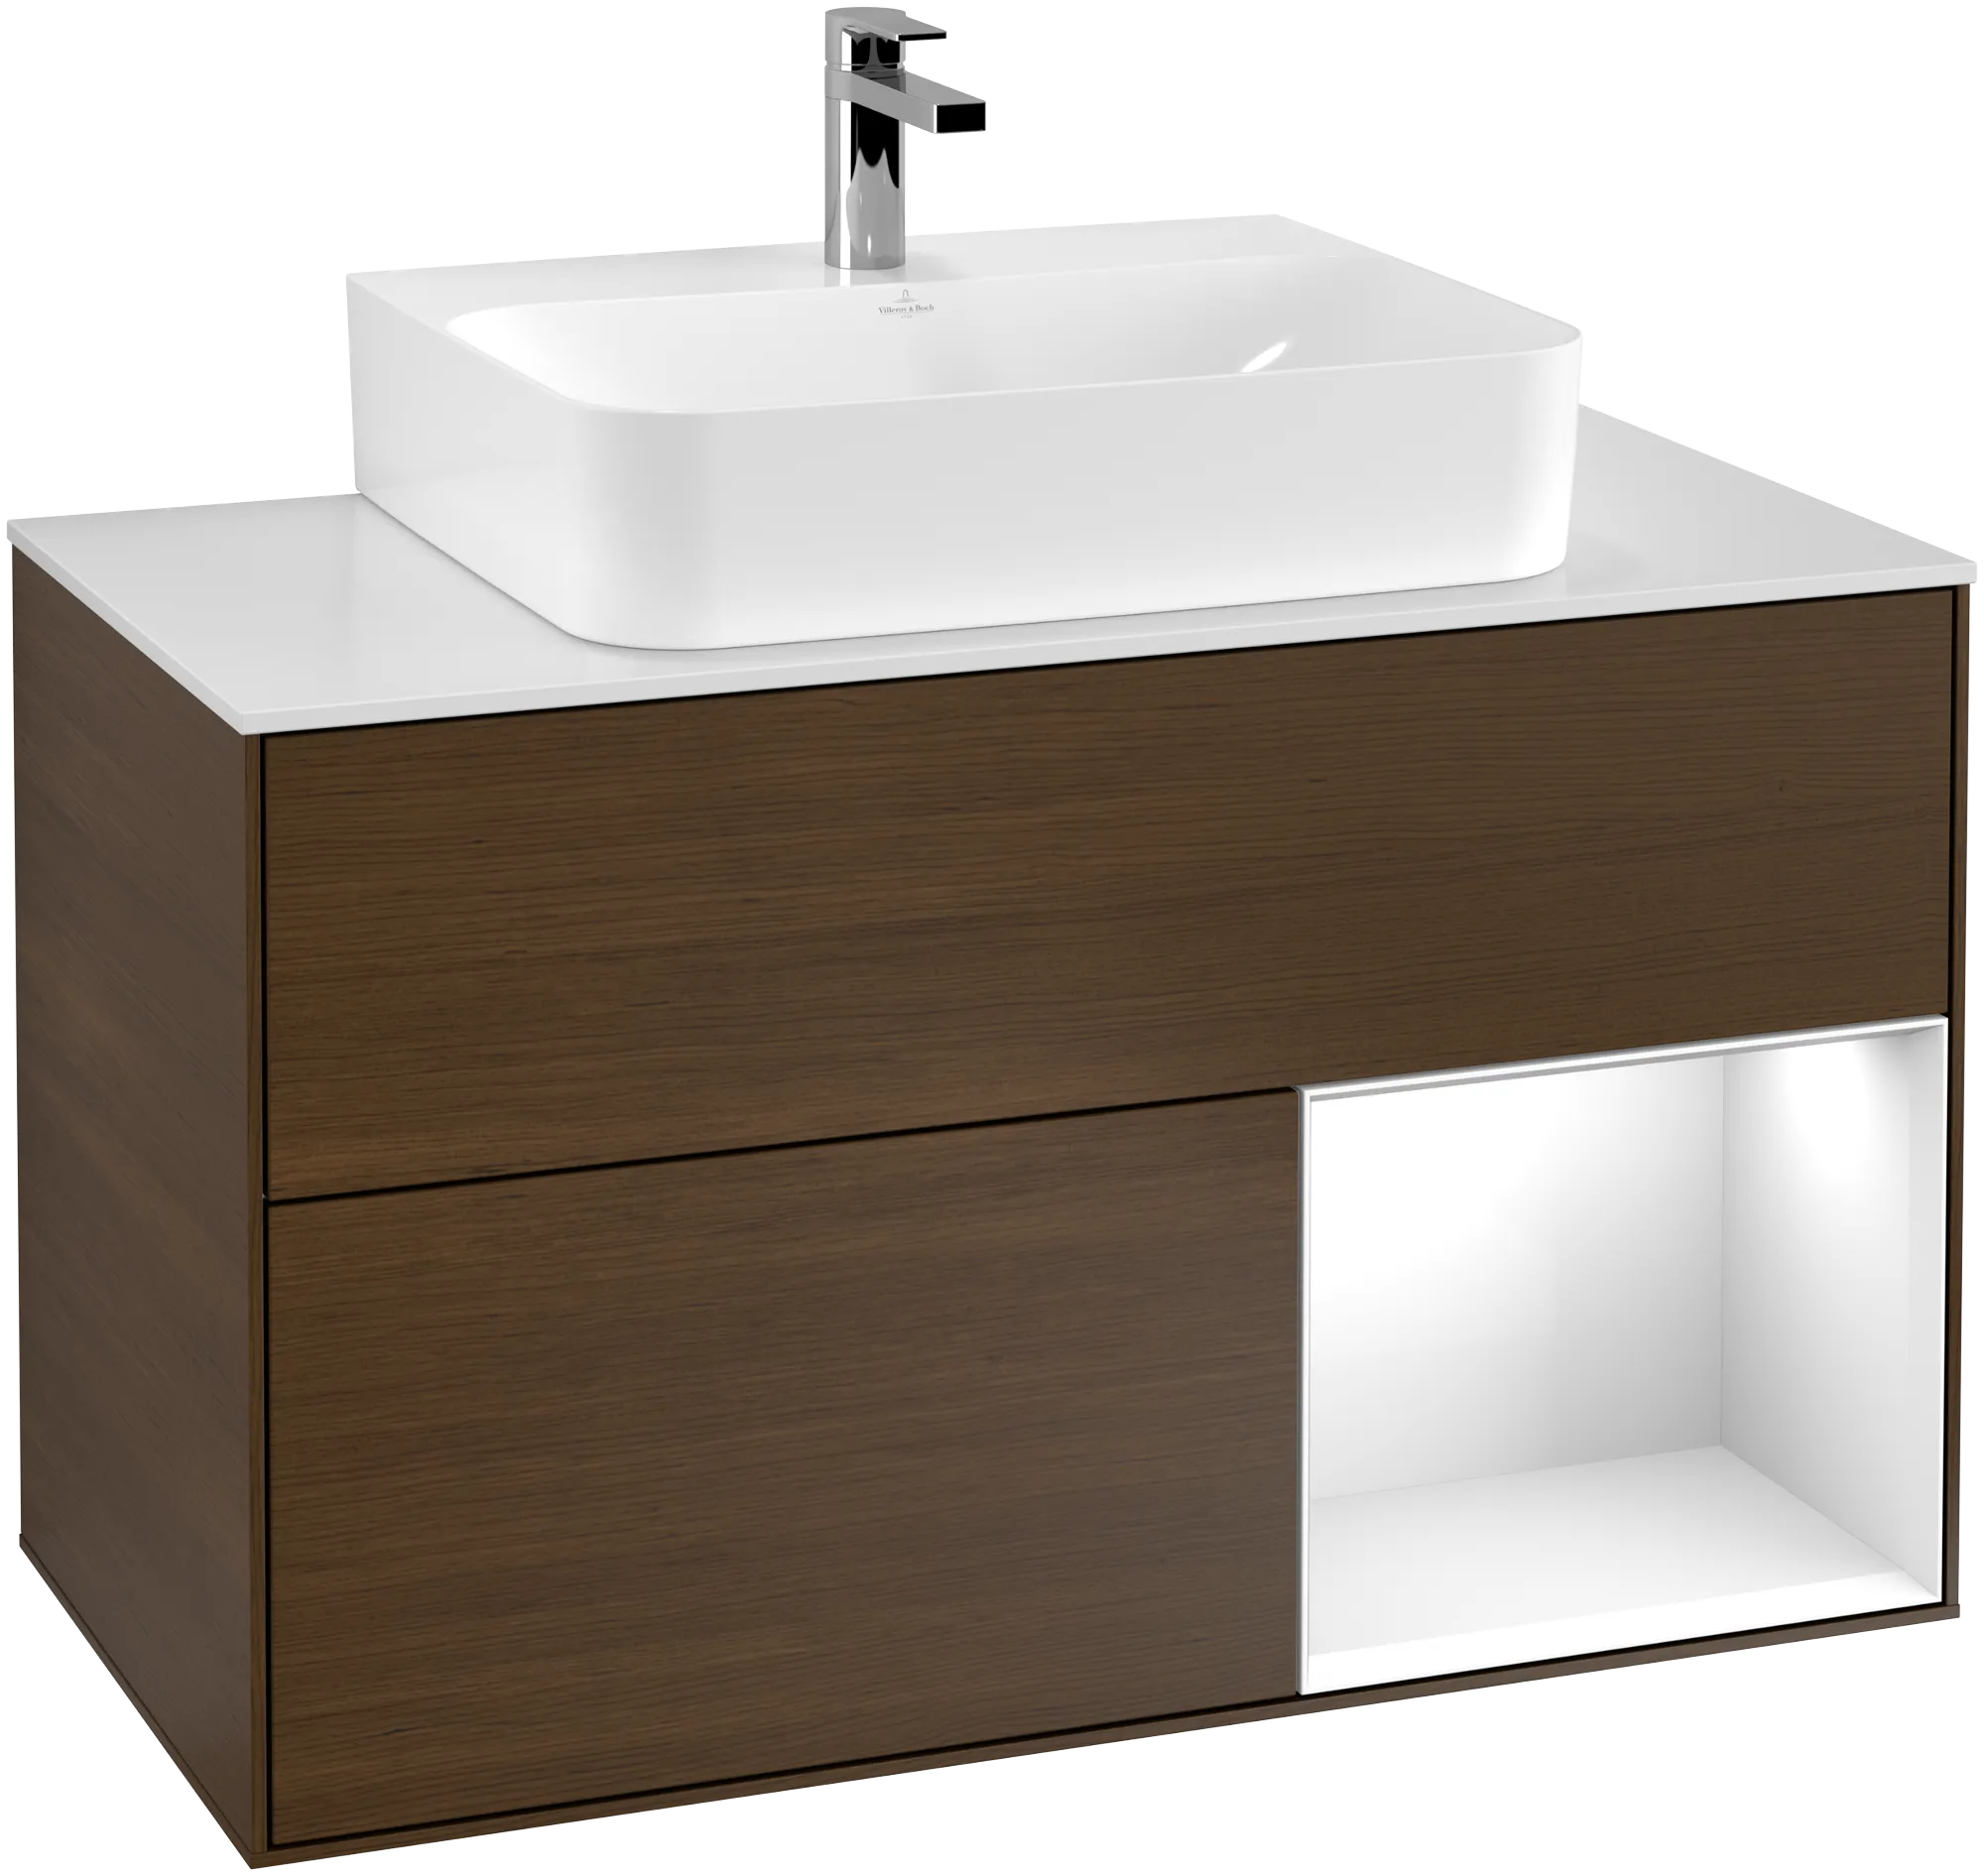 Obrázek VILLEROY BOCH Finion Vanity unit, with lighting, 2 pull-out compartments, 1000 x 603 x 501 mm, Walnut Veneer / Glossy White Lacquer / Glass White Matt #G121GFGN